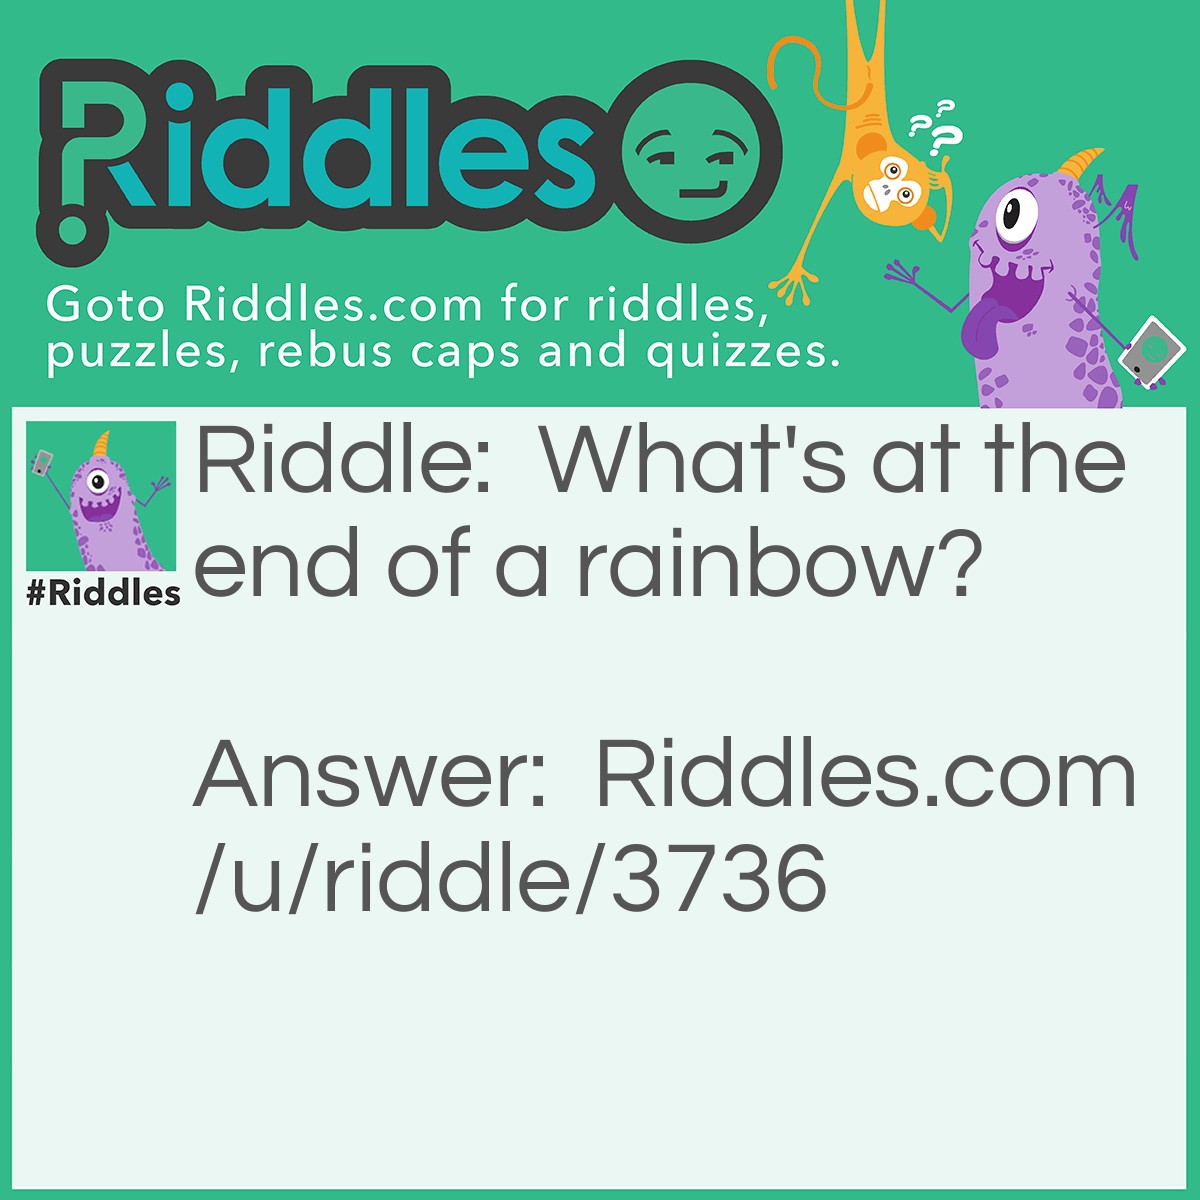 Riddle: What's at the end of a rainbow? Answer: A w.